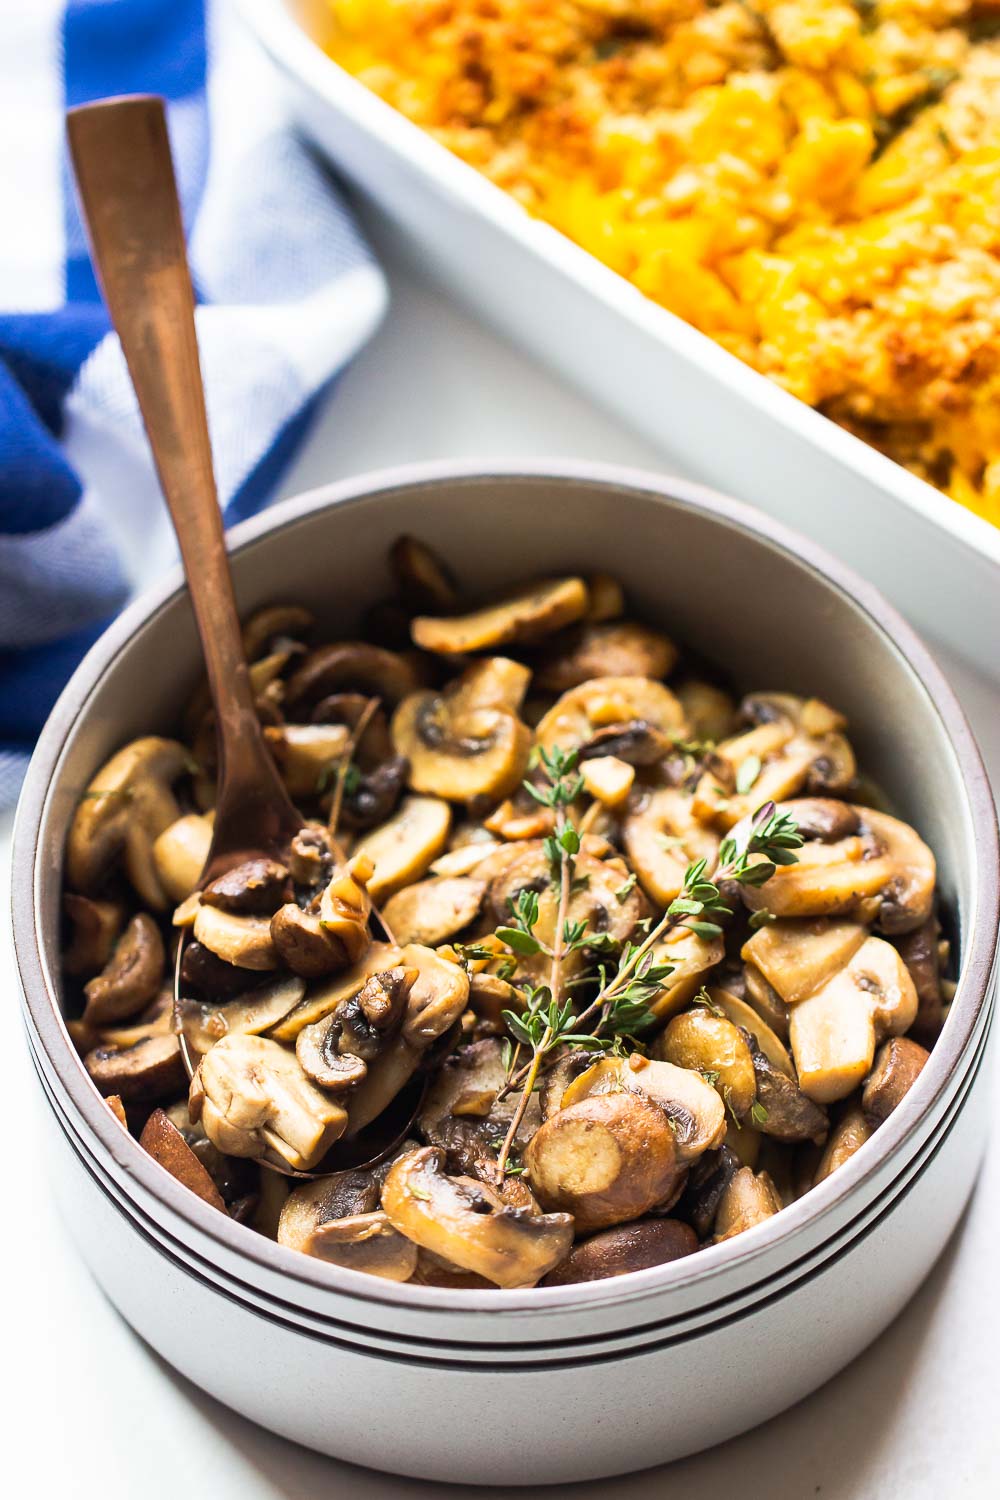 Sauteed Garlic-Butter Mushrooms. In addition to their wonderful complex taste, mushrooms are packed with good-for-you nutrients. They are the perfect addition to soups, stews, and even cooked rice, but they stand alone very well, too. In this easy recipe, mushrooms are sautéed in garlic butter with a hint of herbs and make an easy, healthy side dish that you’ll want to make with every single meal. 